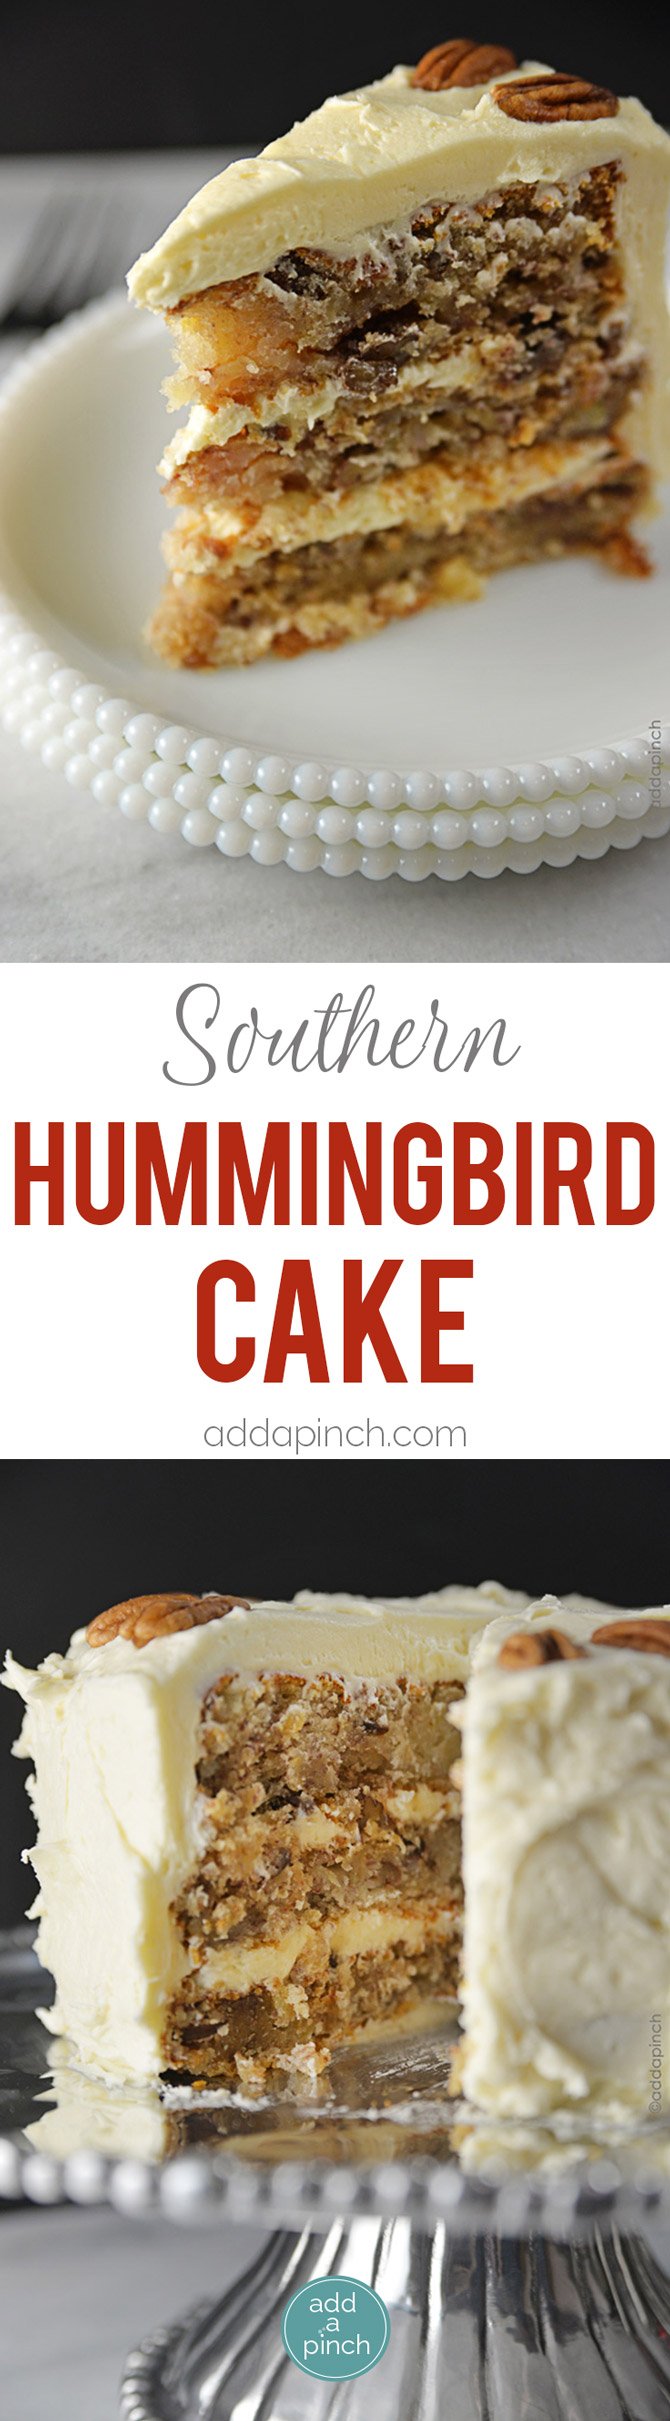 Hummingbird Cake Recipe - Hummingbird Cake is a classic, Southern cake recipe perfect for serving at so many special occasions or when entertaining. Get this heirloom Hummingbird Cake recipe for your next event. // addapinch.com